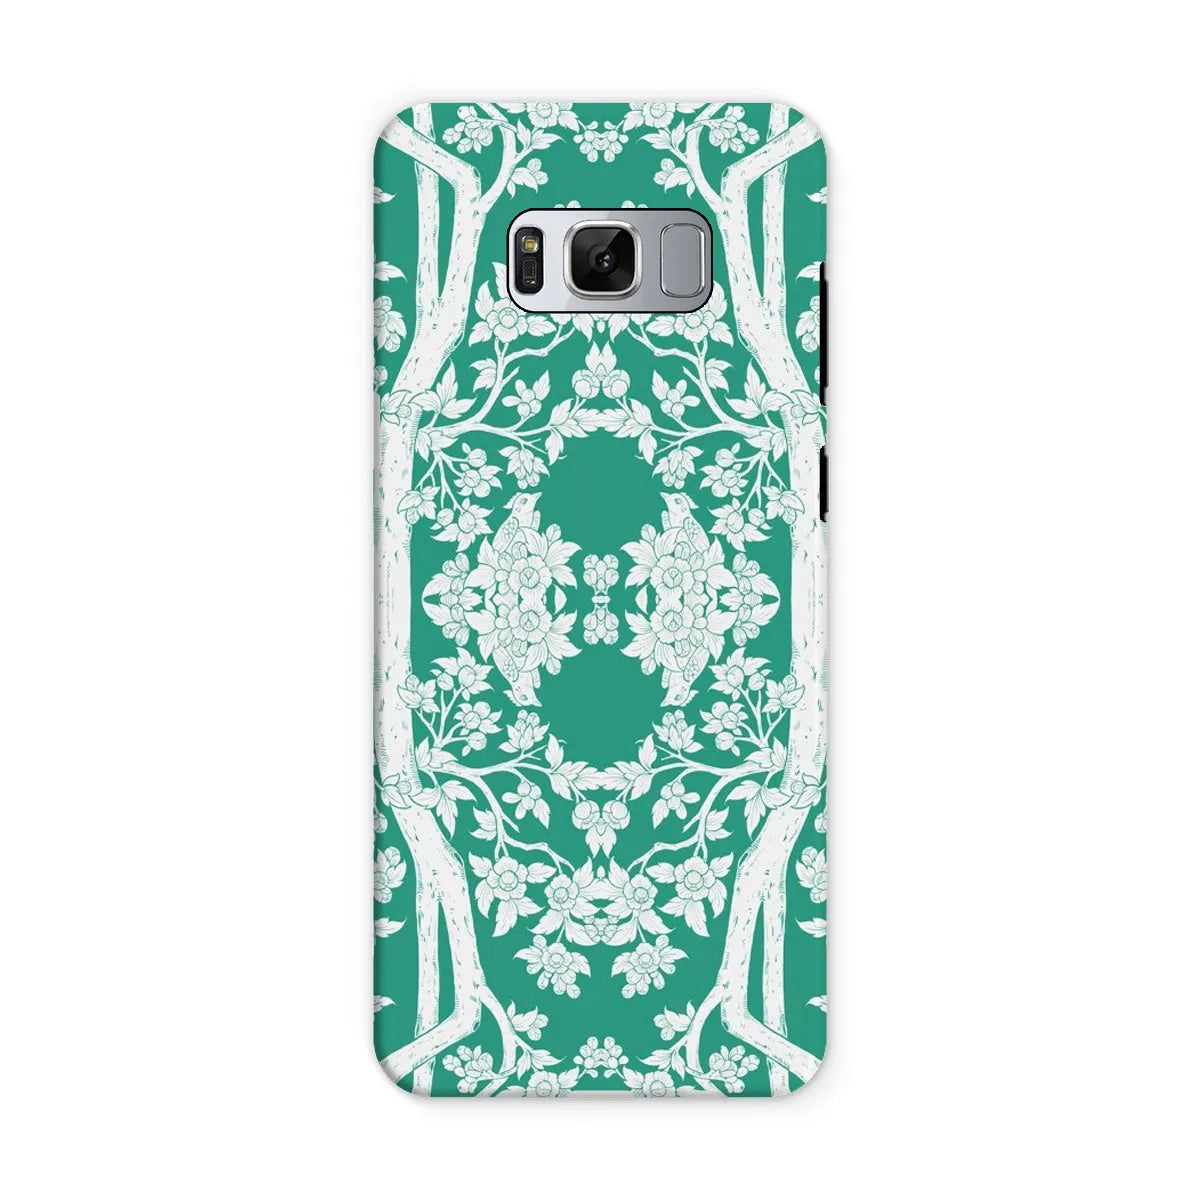 Aviary Green Aesthetic Pattern Art Phone Case - Samsung Galaxy S8 / Matte - Mobile Phone Cases - Aesthetic Art